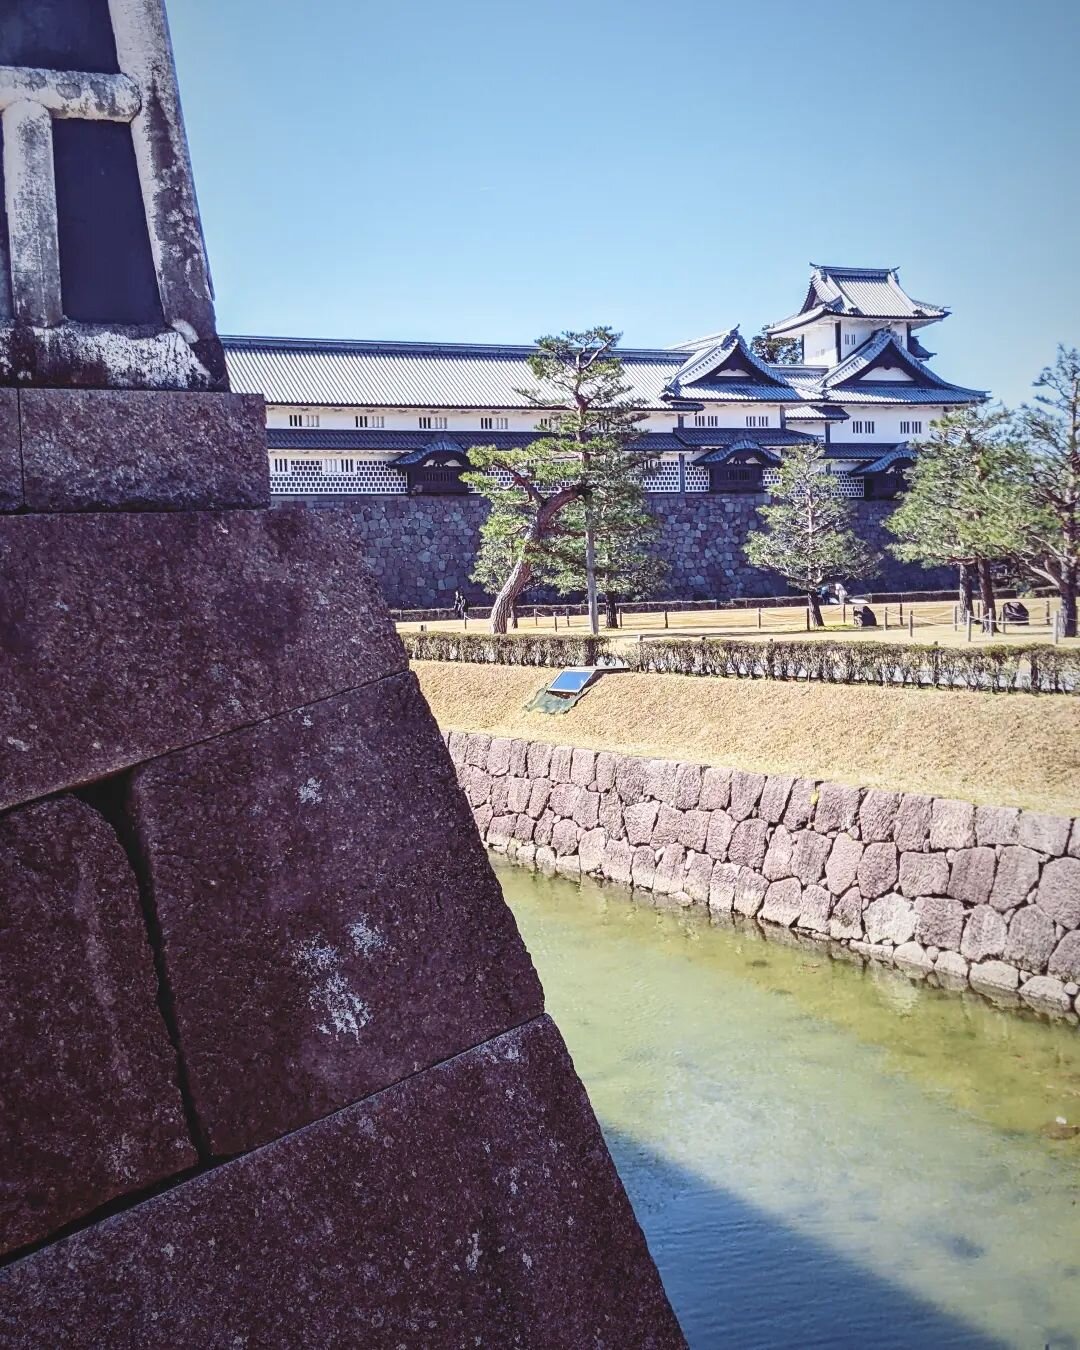 I was recently in Kanazawa to guide a tour from there into the mountains and rural landscapes of the Central Japan. Kanazawa is now firmly on the tourist map and its most popular spots are crowded but despite that, it remains my favourite city in the